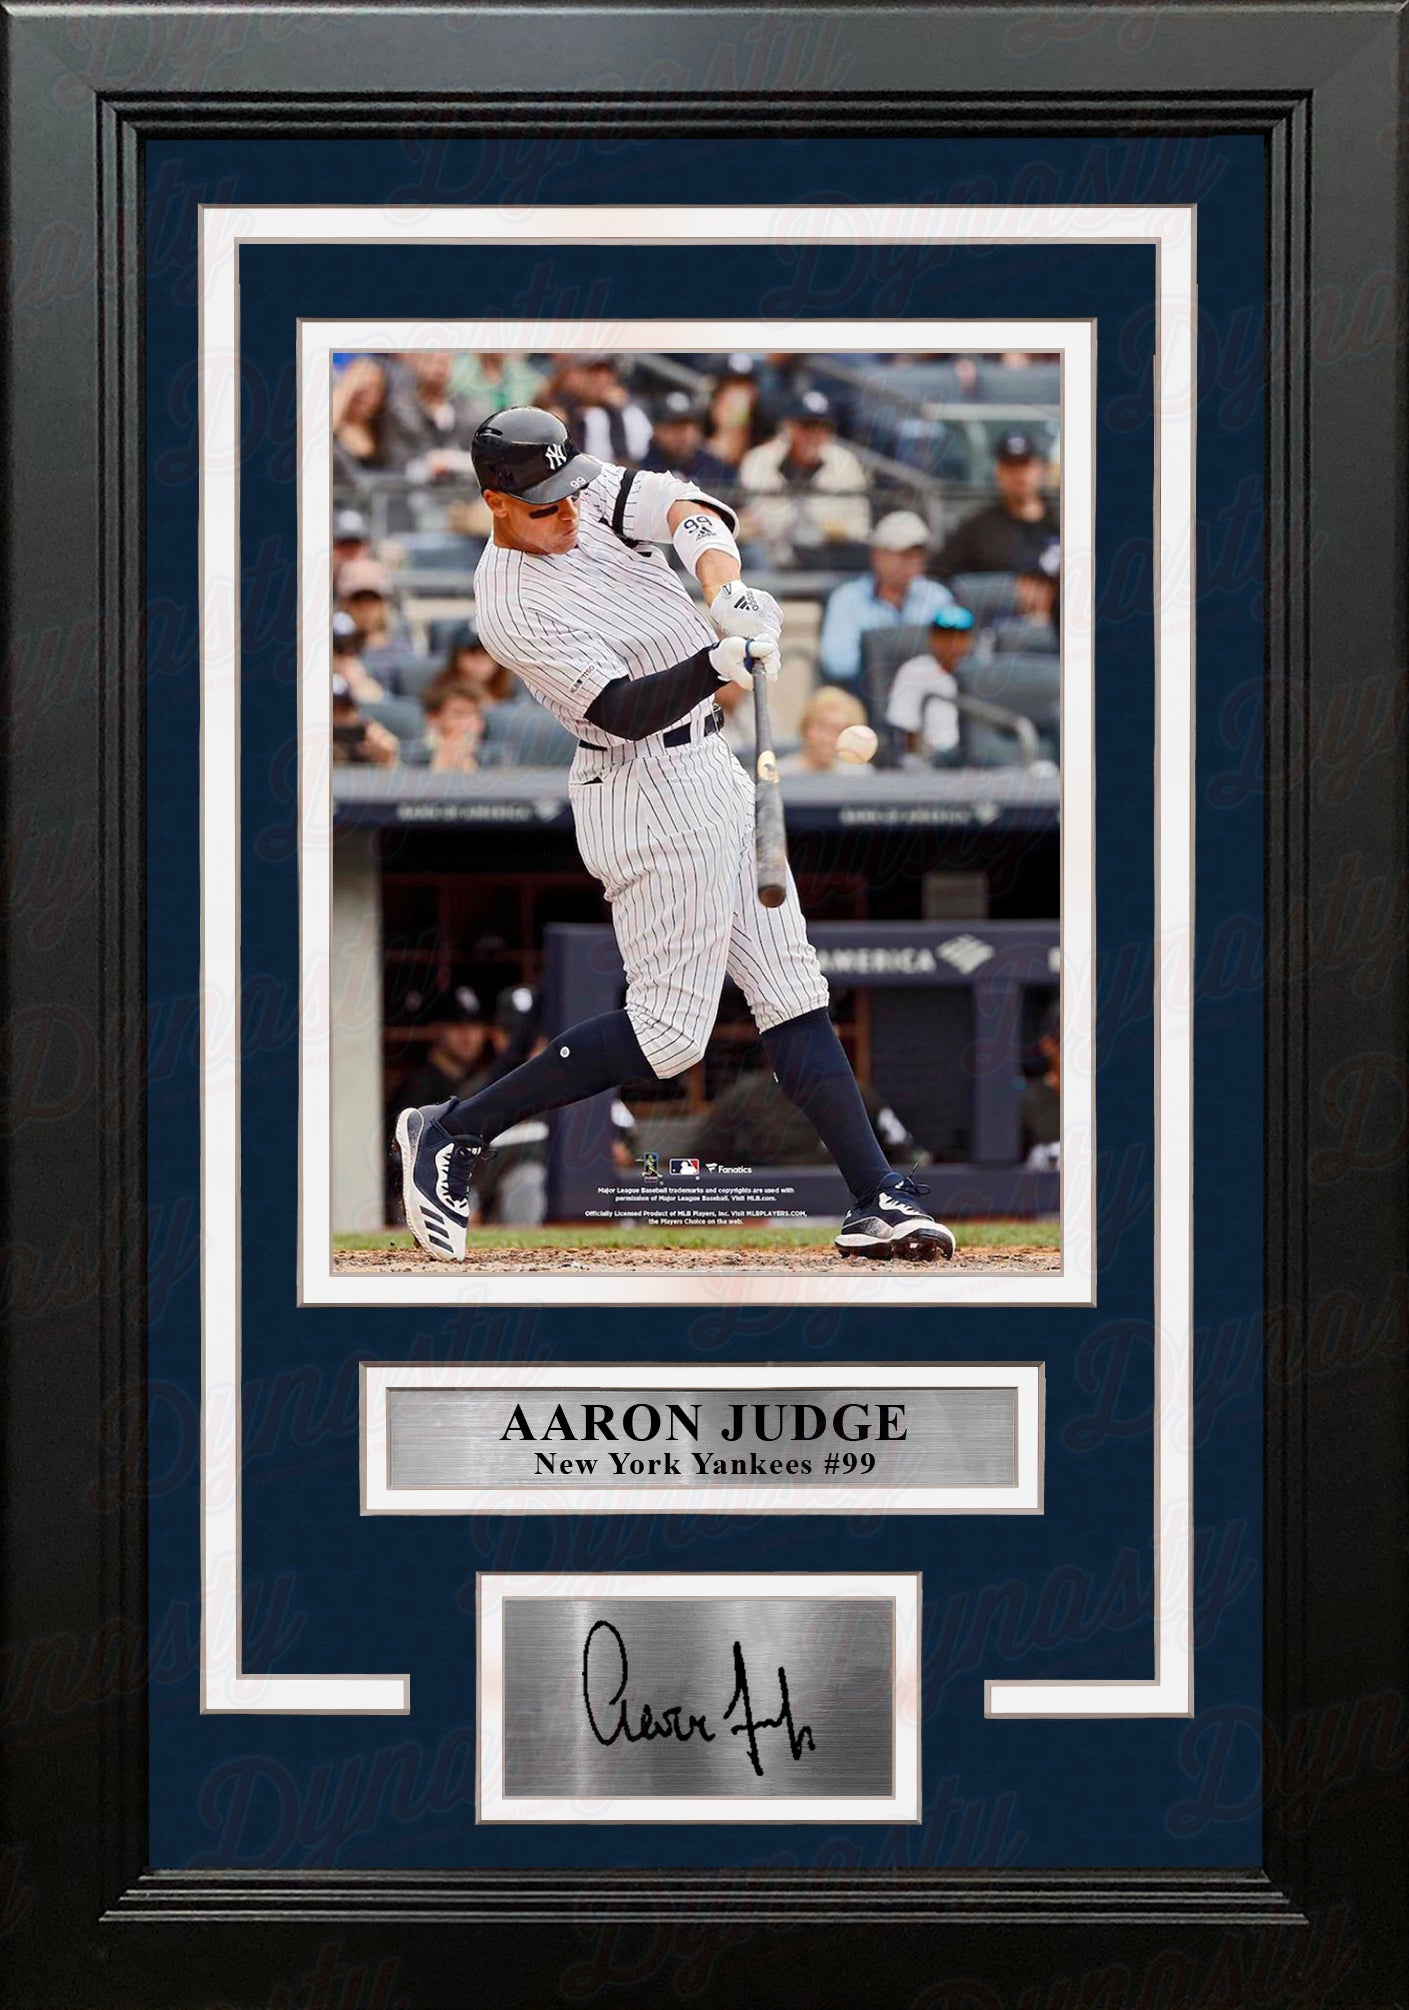 Aaron Judge in Action New York Yankees 8" x 10" Framed Baseball Photo with Engraved Autograph - Dynasty Sports & Framing 